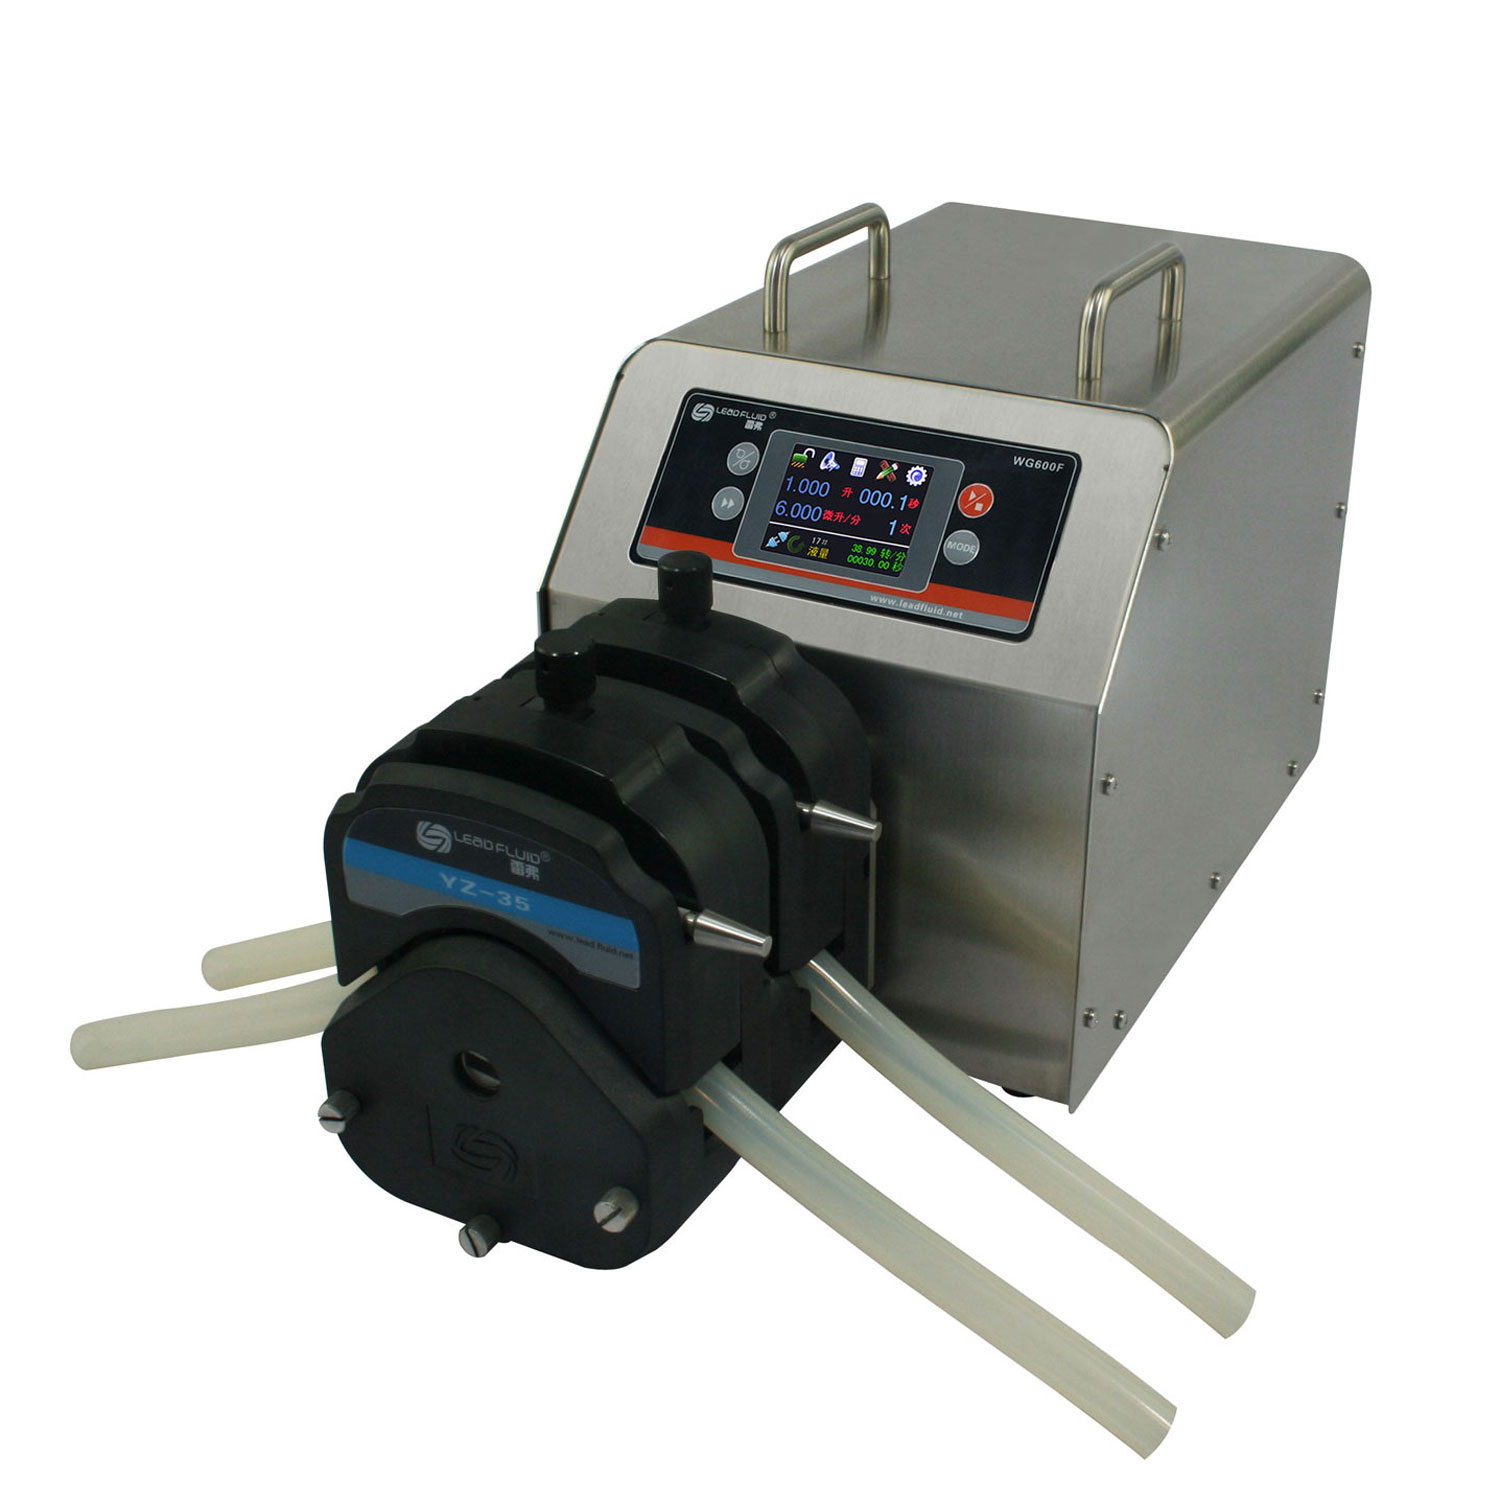 1 Channel Flow Rate 0.4~13 L//min WG600S Industrial Variable Speed Peristaltic Pump with Pump Head YZ35